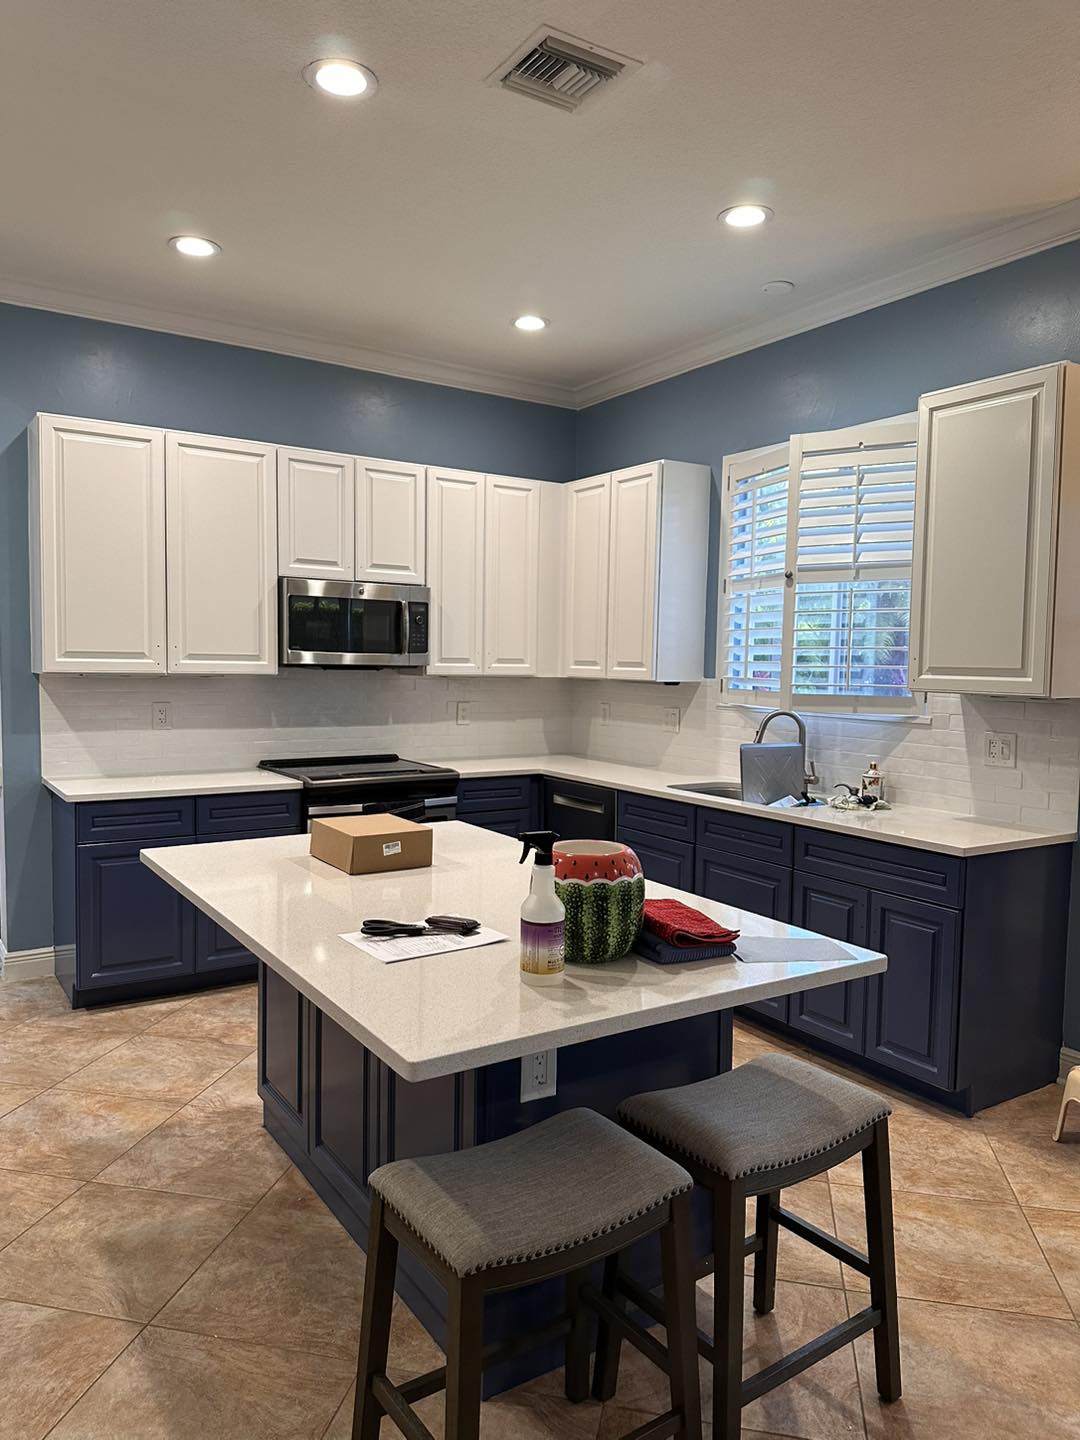 An inviting kitchen boasts a contrasting design with crisp white upper cabinets and elegant navy lower cabinets, finished by KB Painting & Refinishing. The space is enhanced with a white quartz countertop, a classic subway tile backsplash, and warm tile flooring, creating a harmonious blend of classic and contemporary styles in this Port Saint Lucie home.